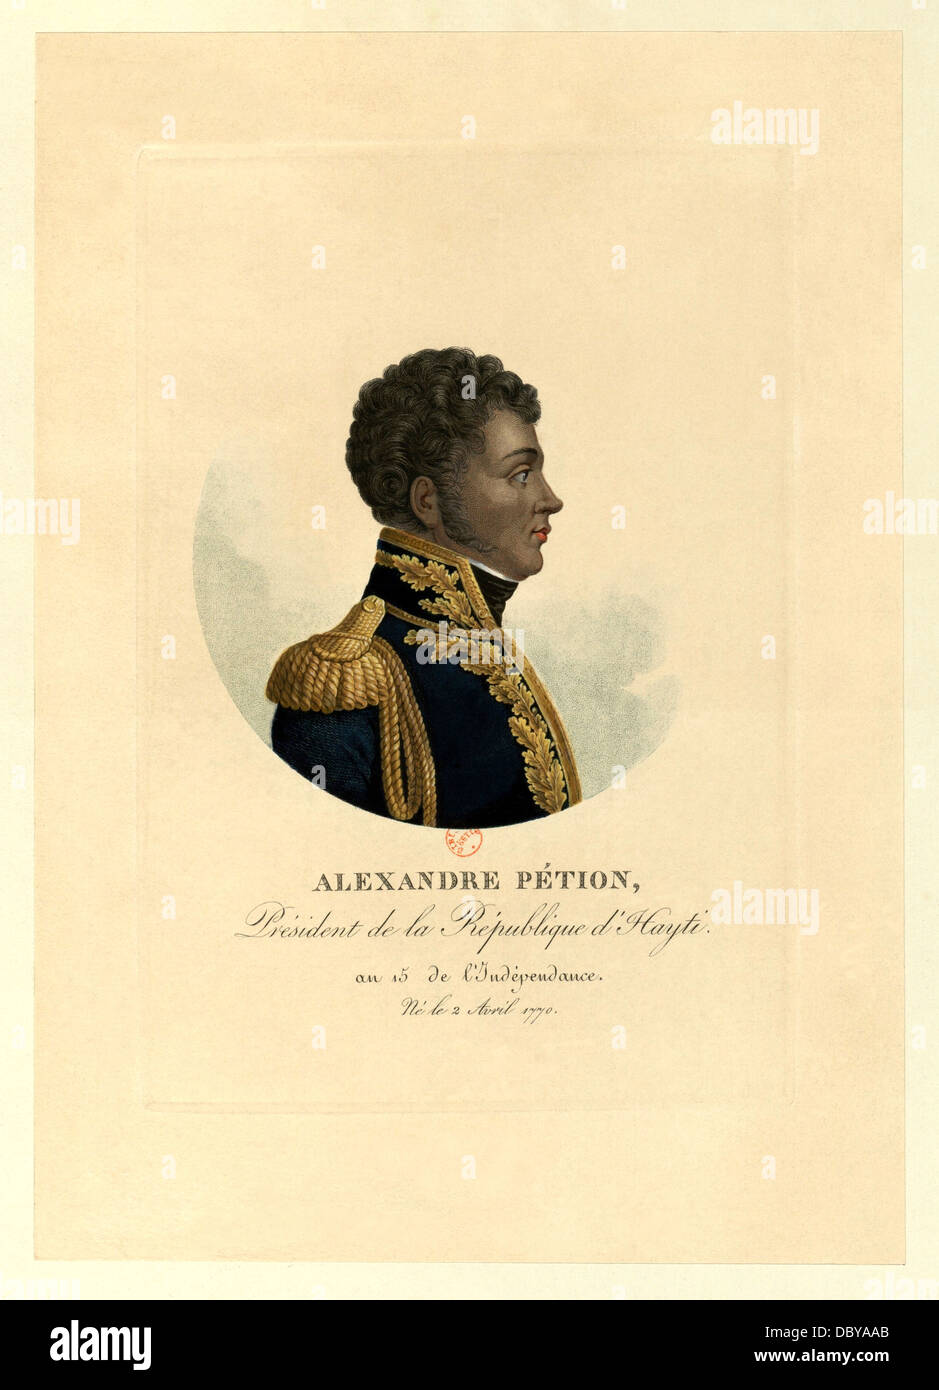 Alexandre Sabès Pétion (1770 - 1818), President of the Republic of Haïti, from 1807 until his death. Stock Photo